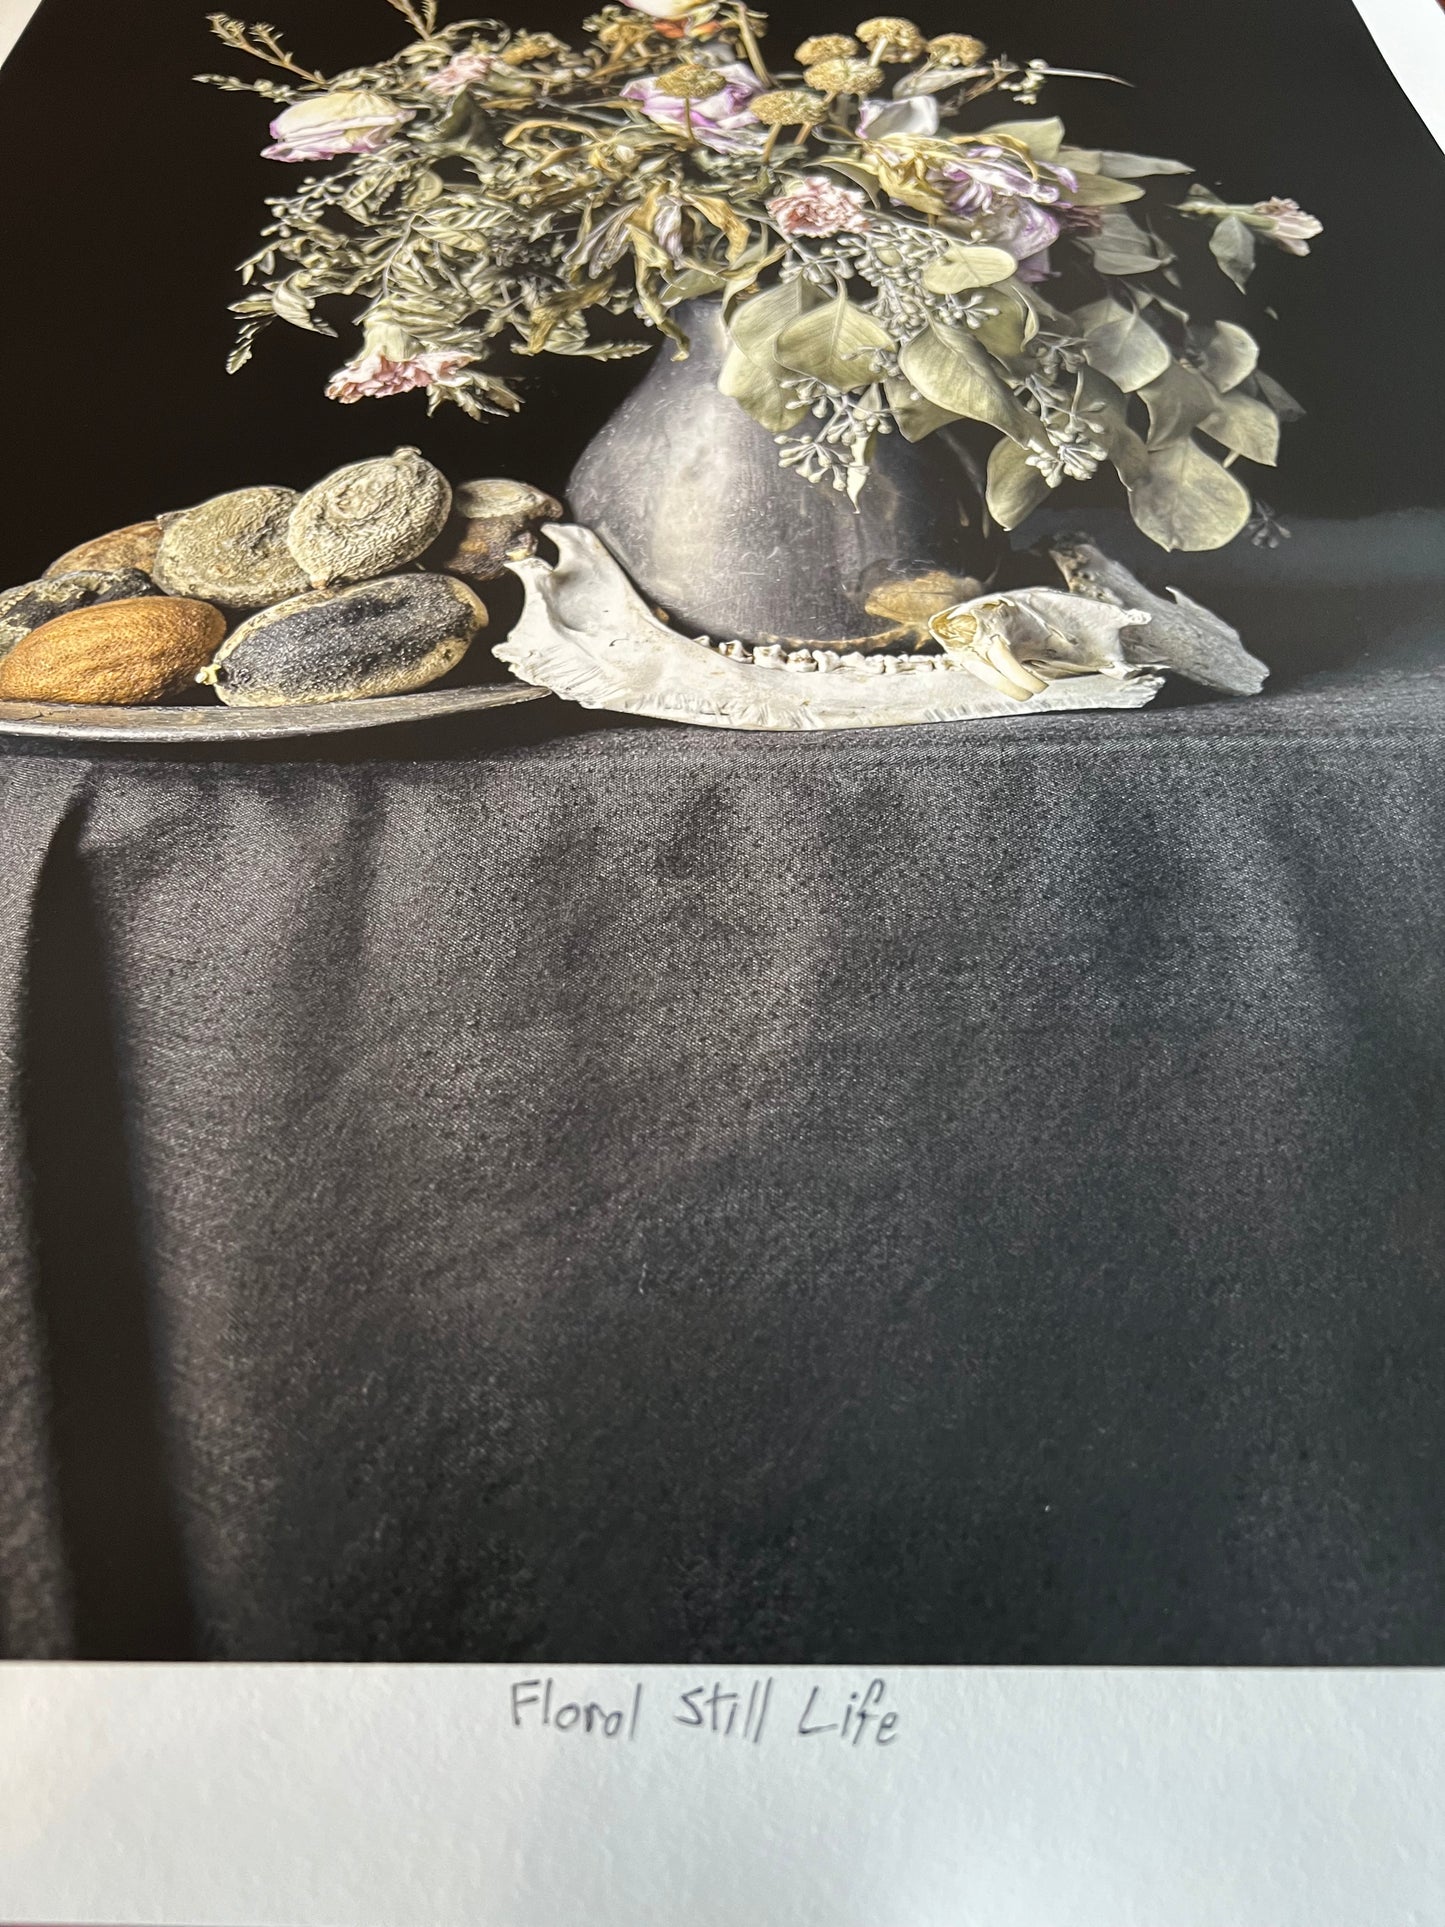 Neal Auch, Floral Still Life - Signed Print